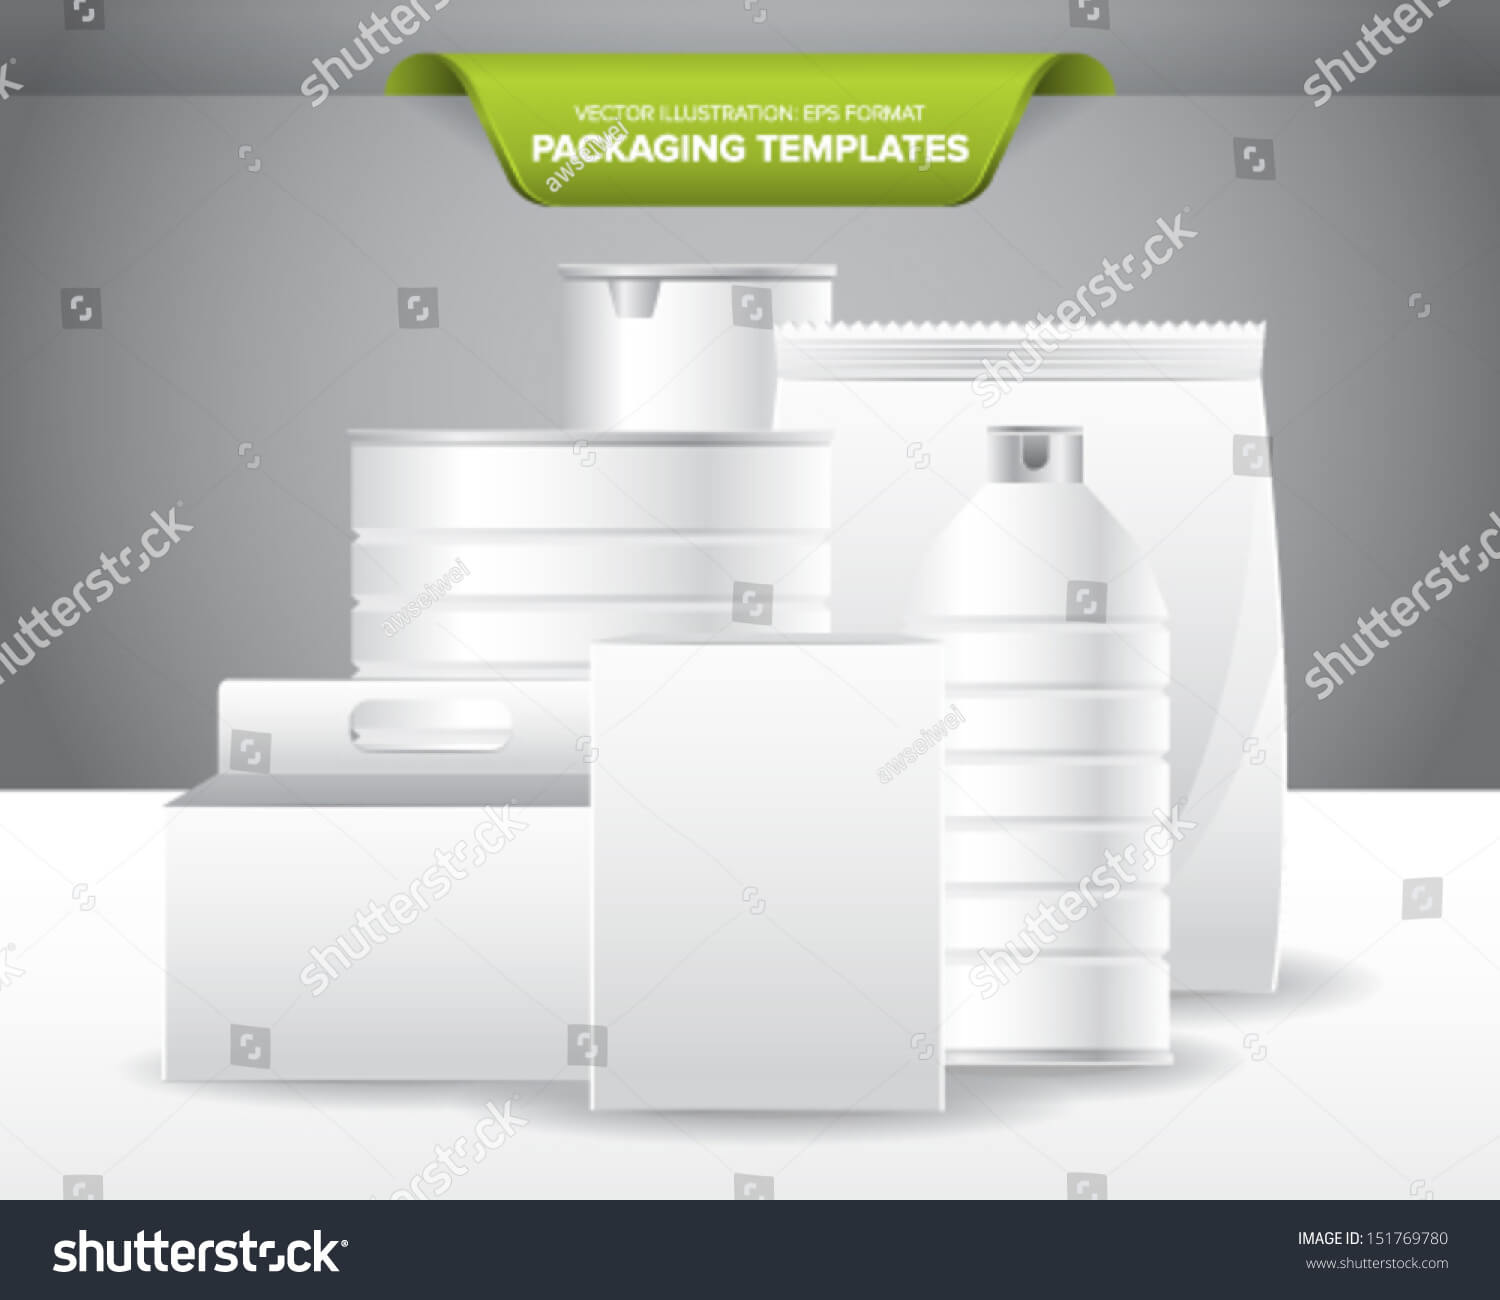 Set Empty Blank Packaging Templates Food Stock Vector With Blank Packaging Templates